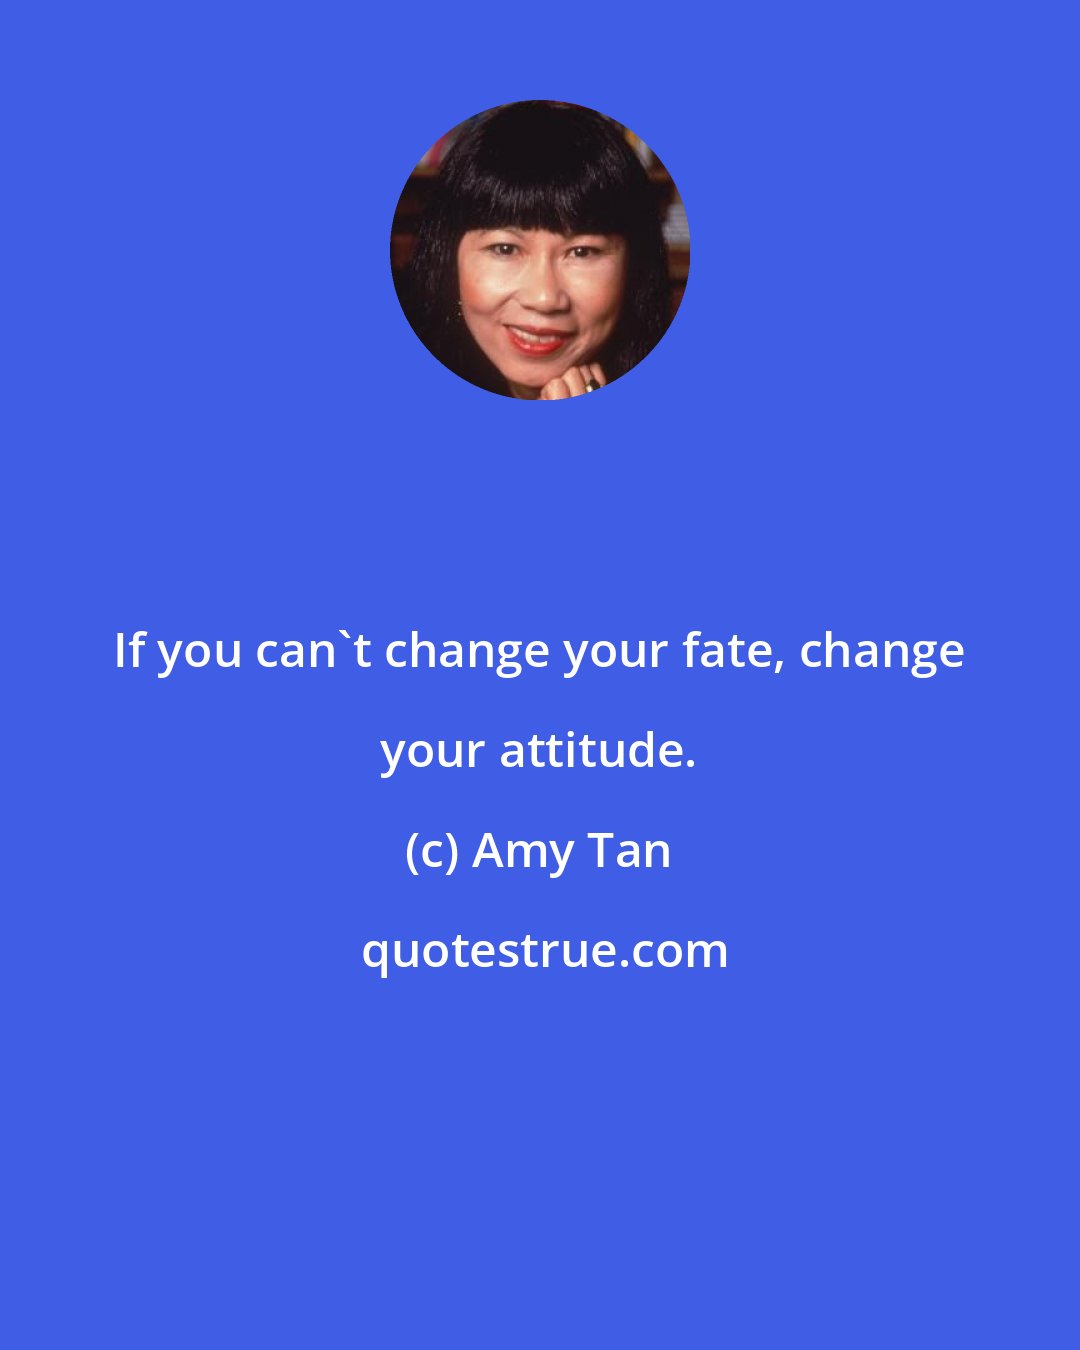 Amy Tan: If you can't change your fate, change your attitude.